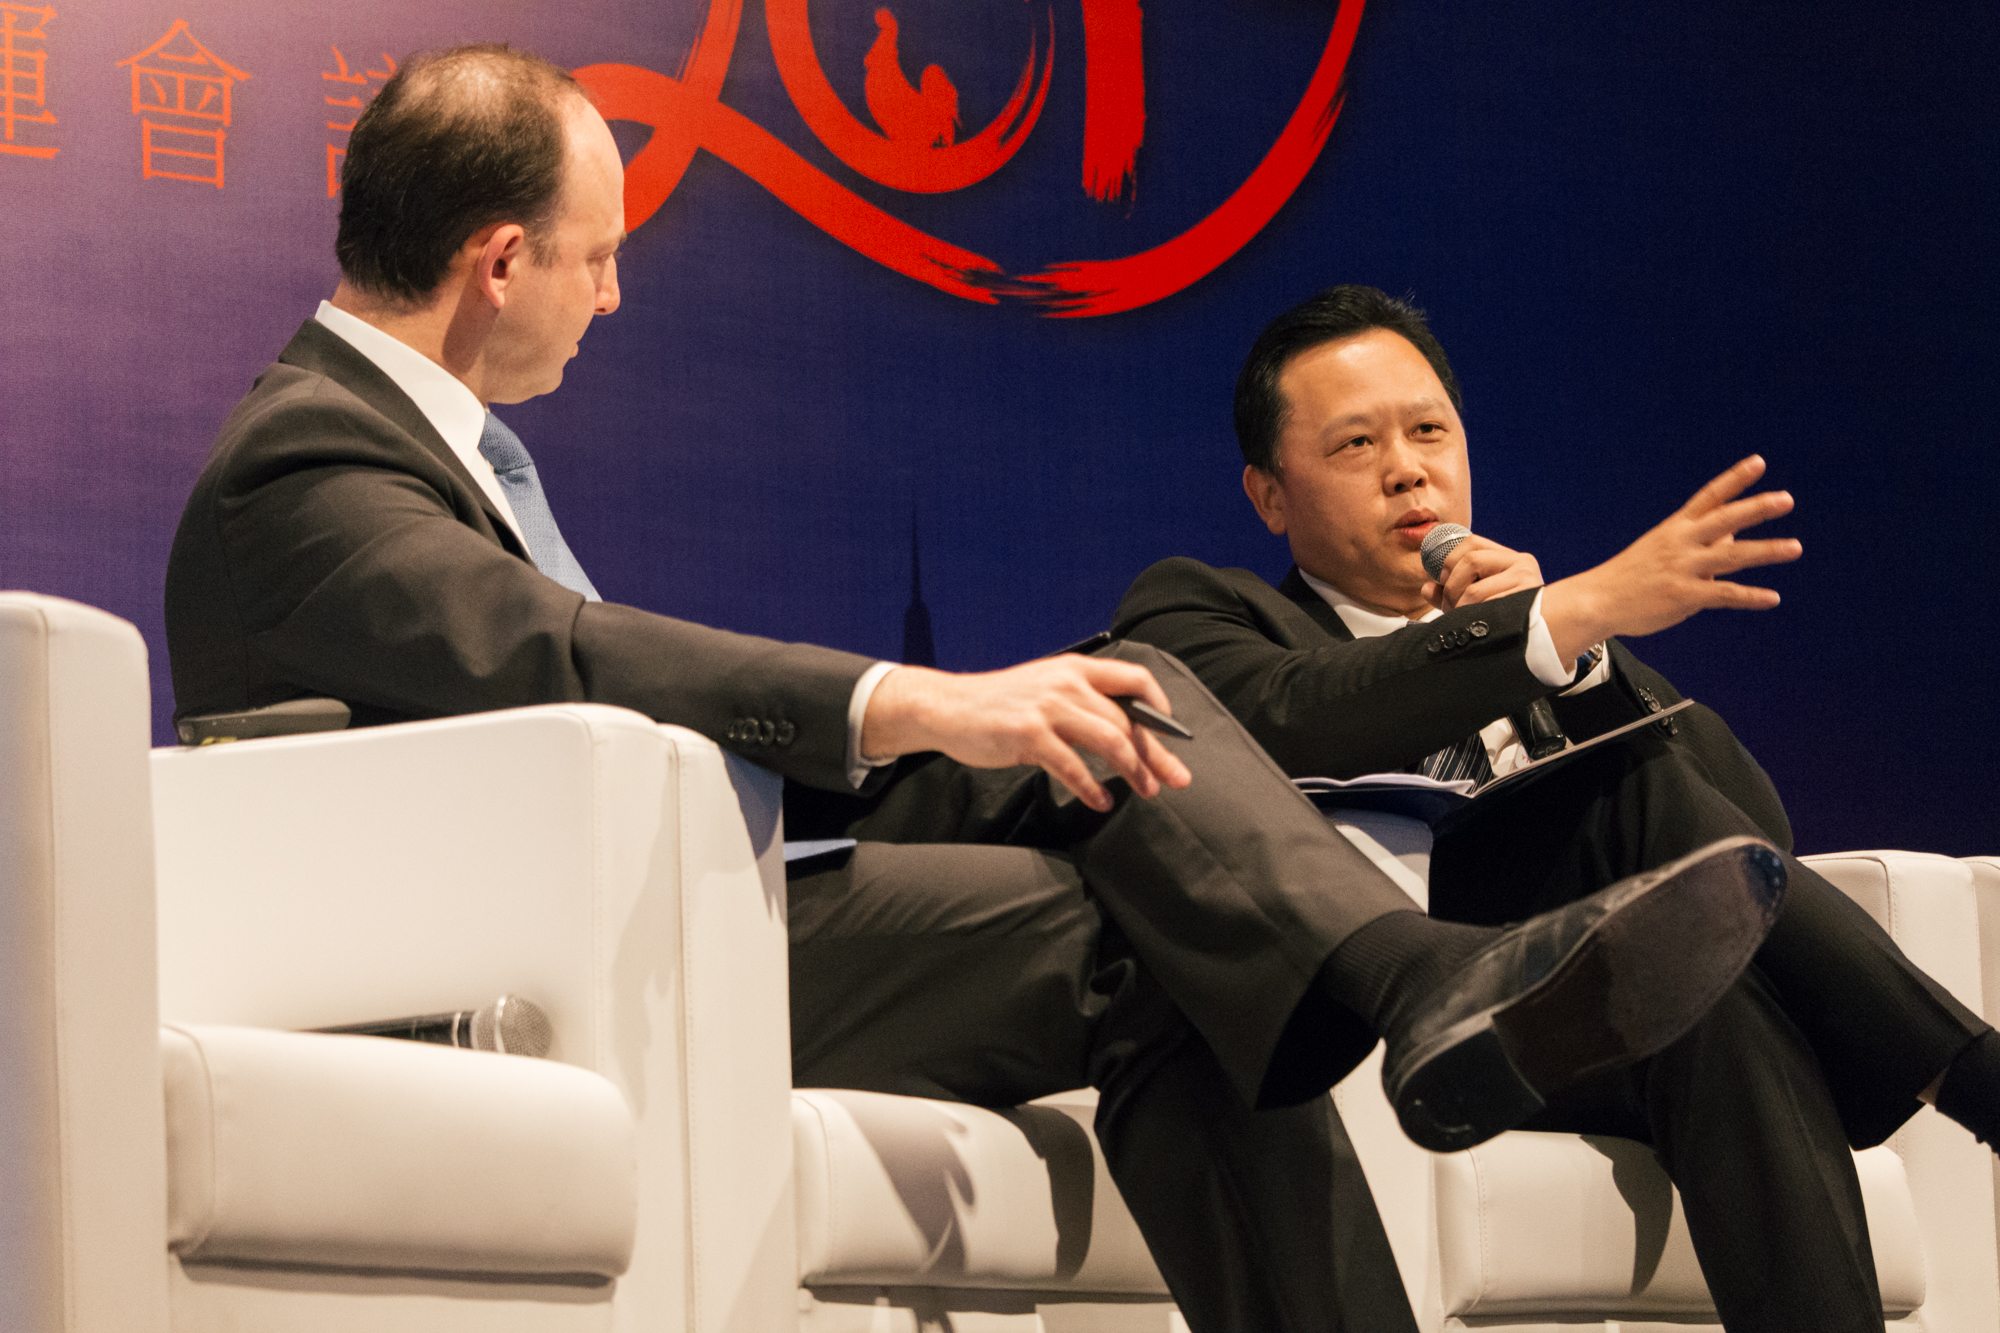 YTO Express Airlines president David SU sits down for a fireside chat with Cargo Facts publisher JJ Hornblass.